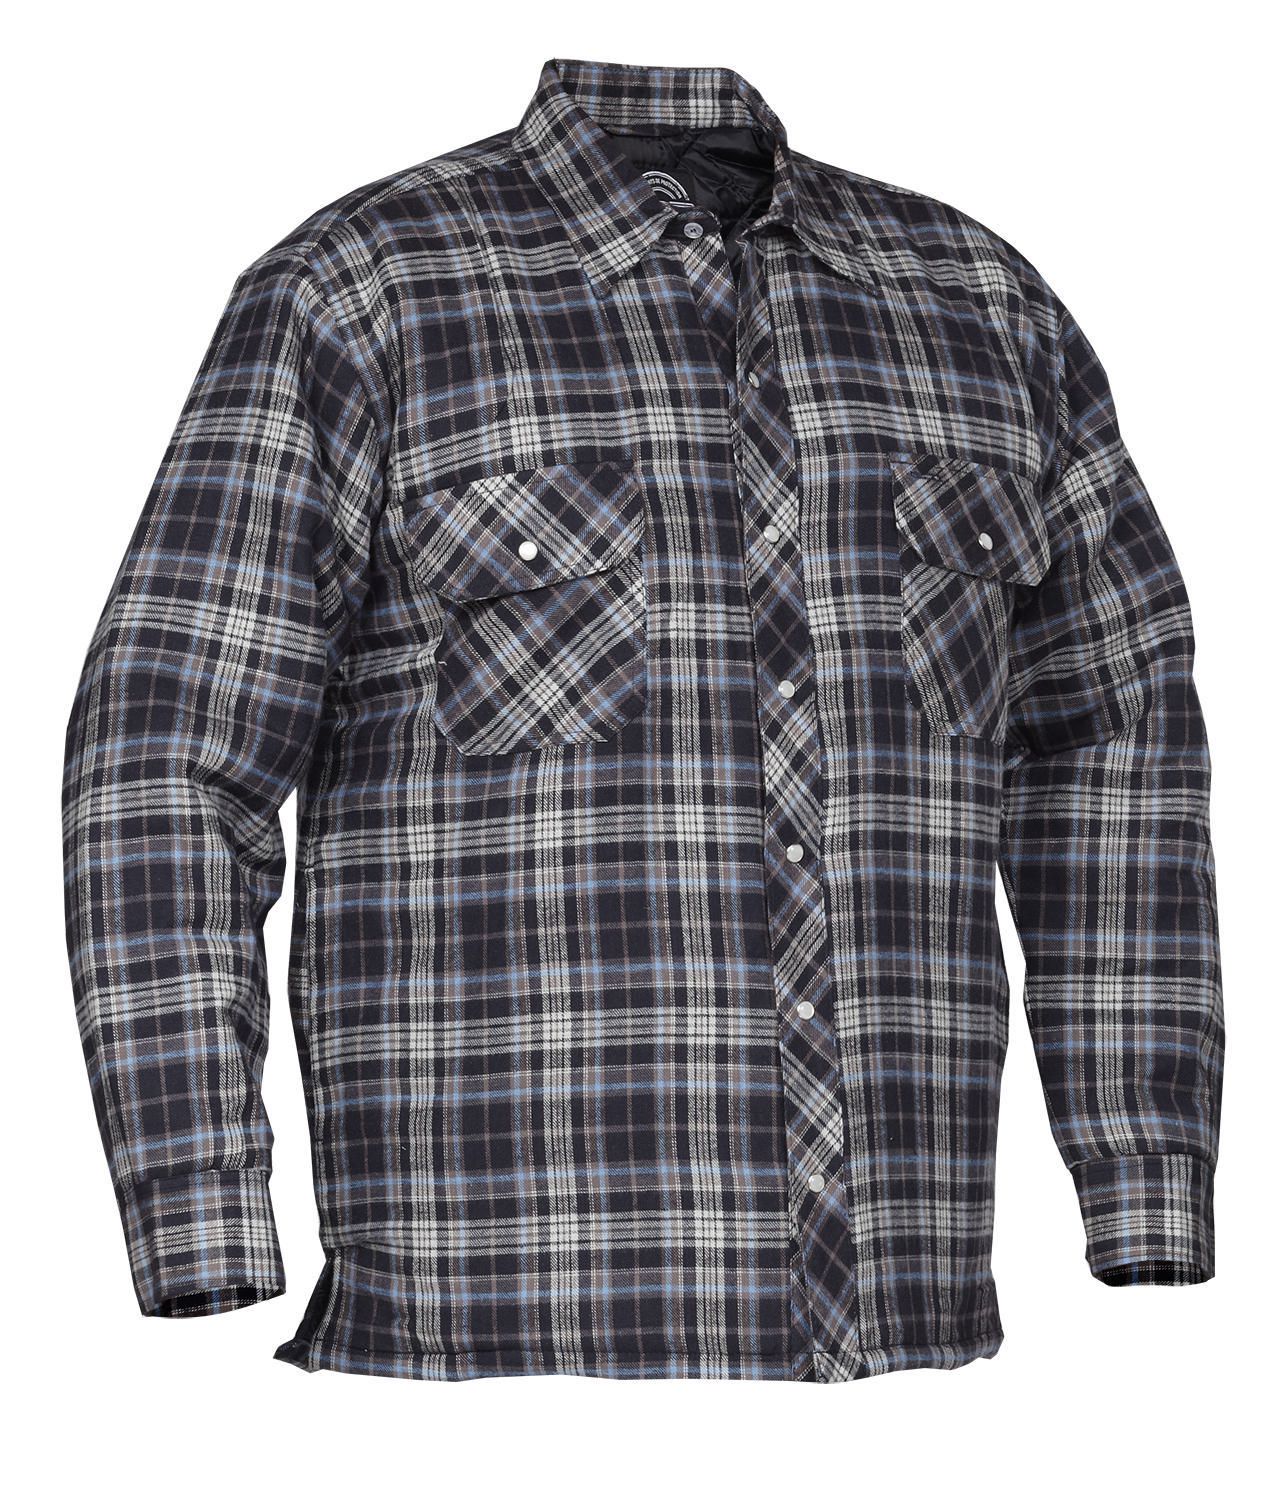 Forcefield Quilted Flannel Shirt | Walmart Canada